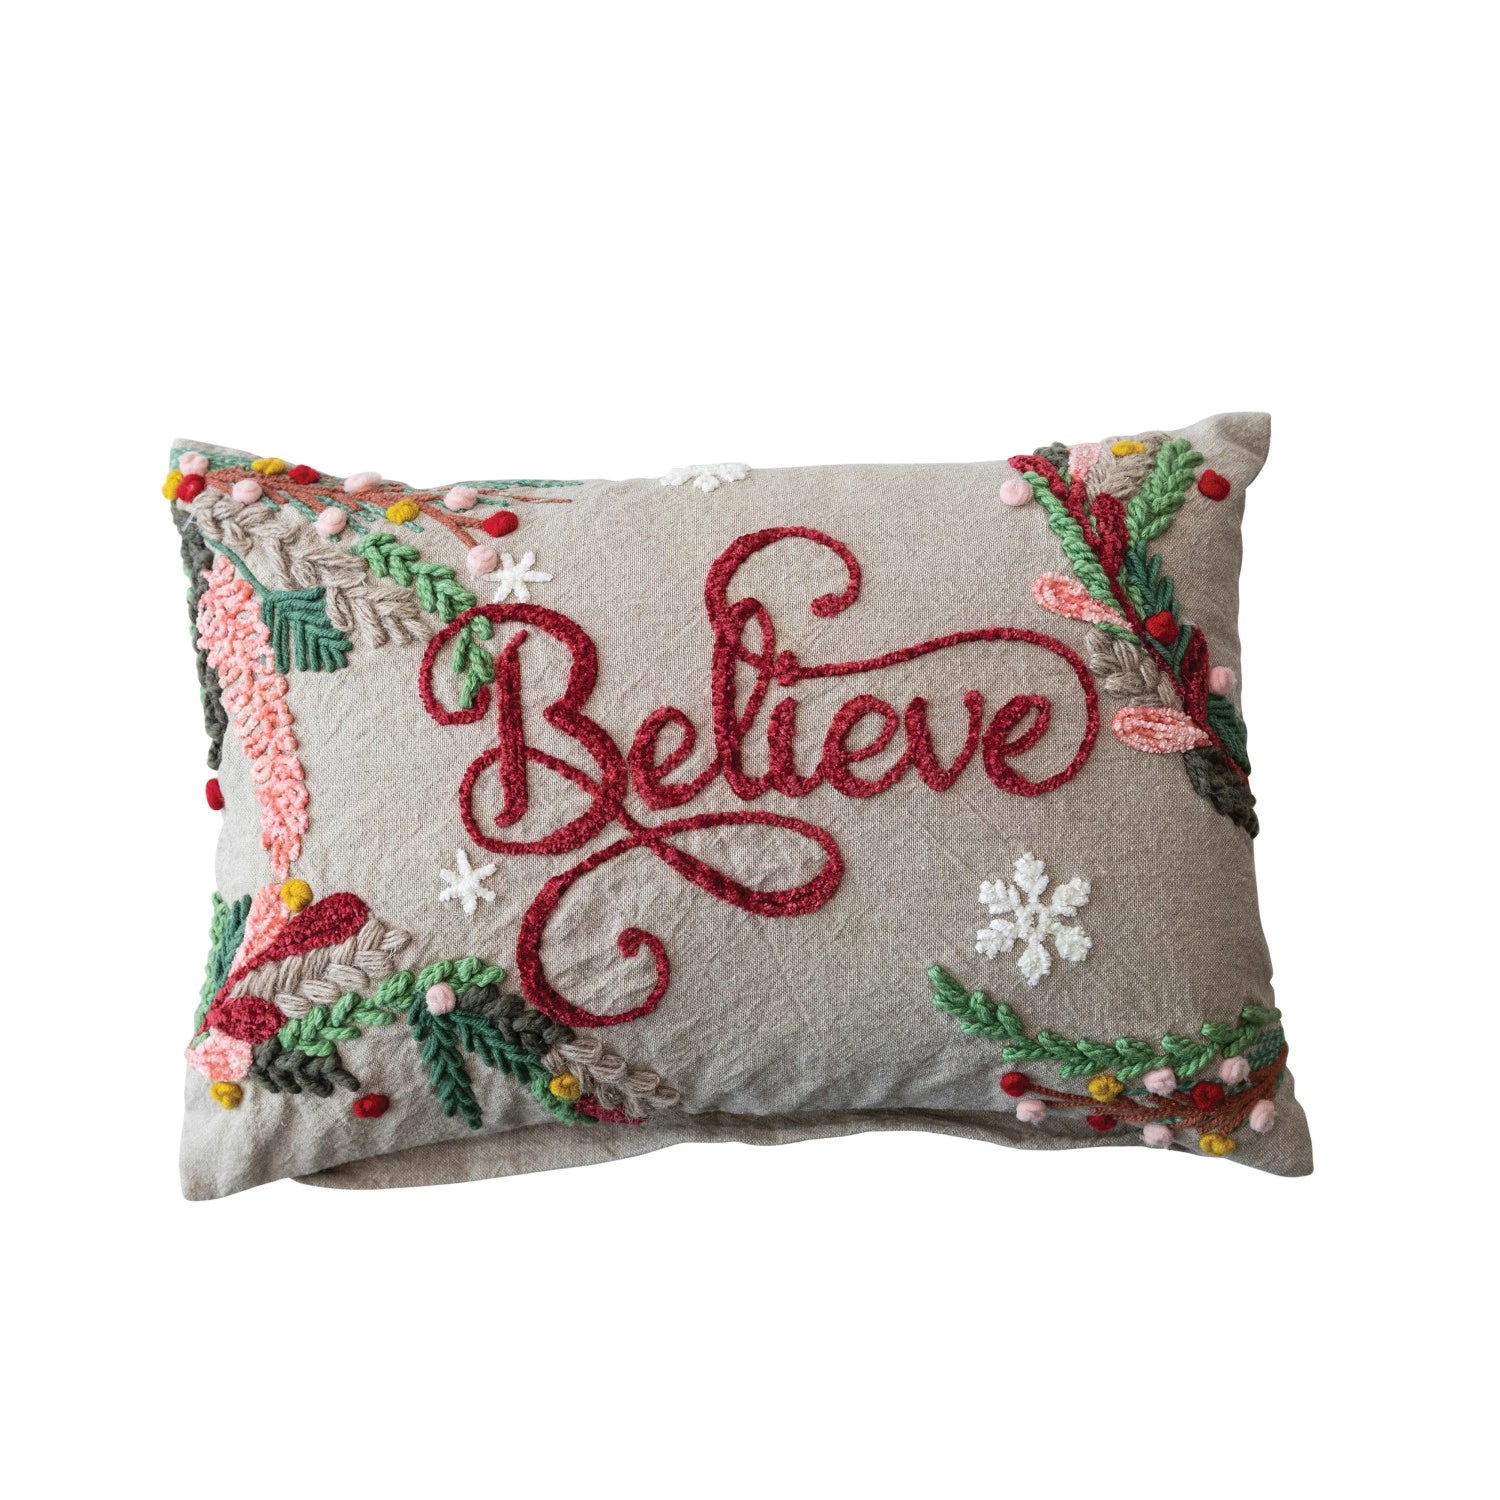 believe embroidered lumbar pillow displayed on a white background